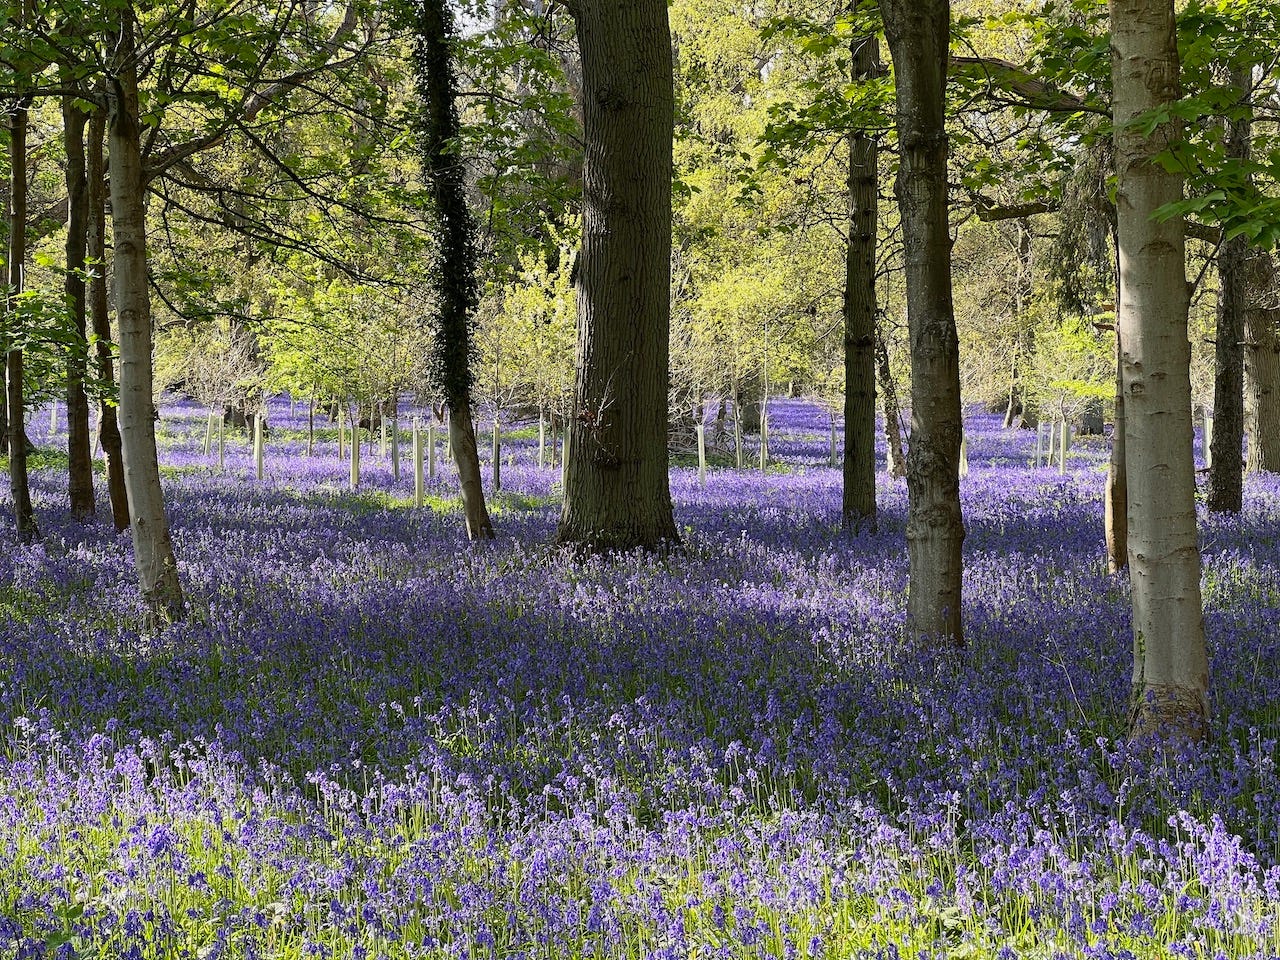 Photo by Author — Bluebells at their peak in my local woods